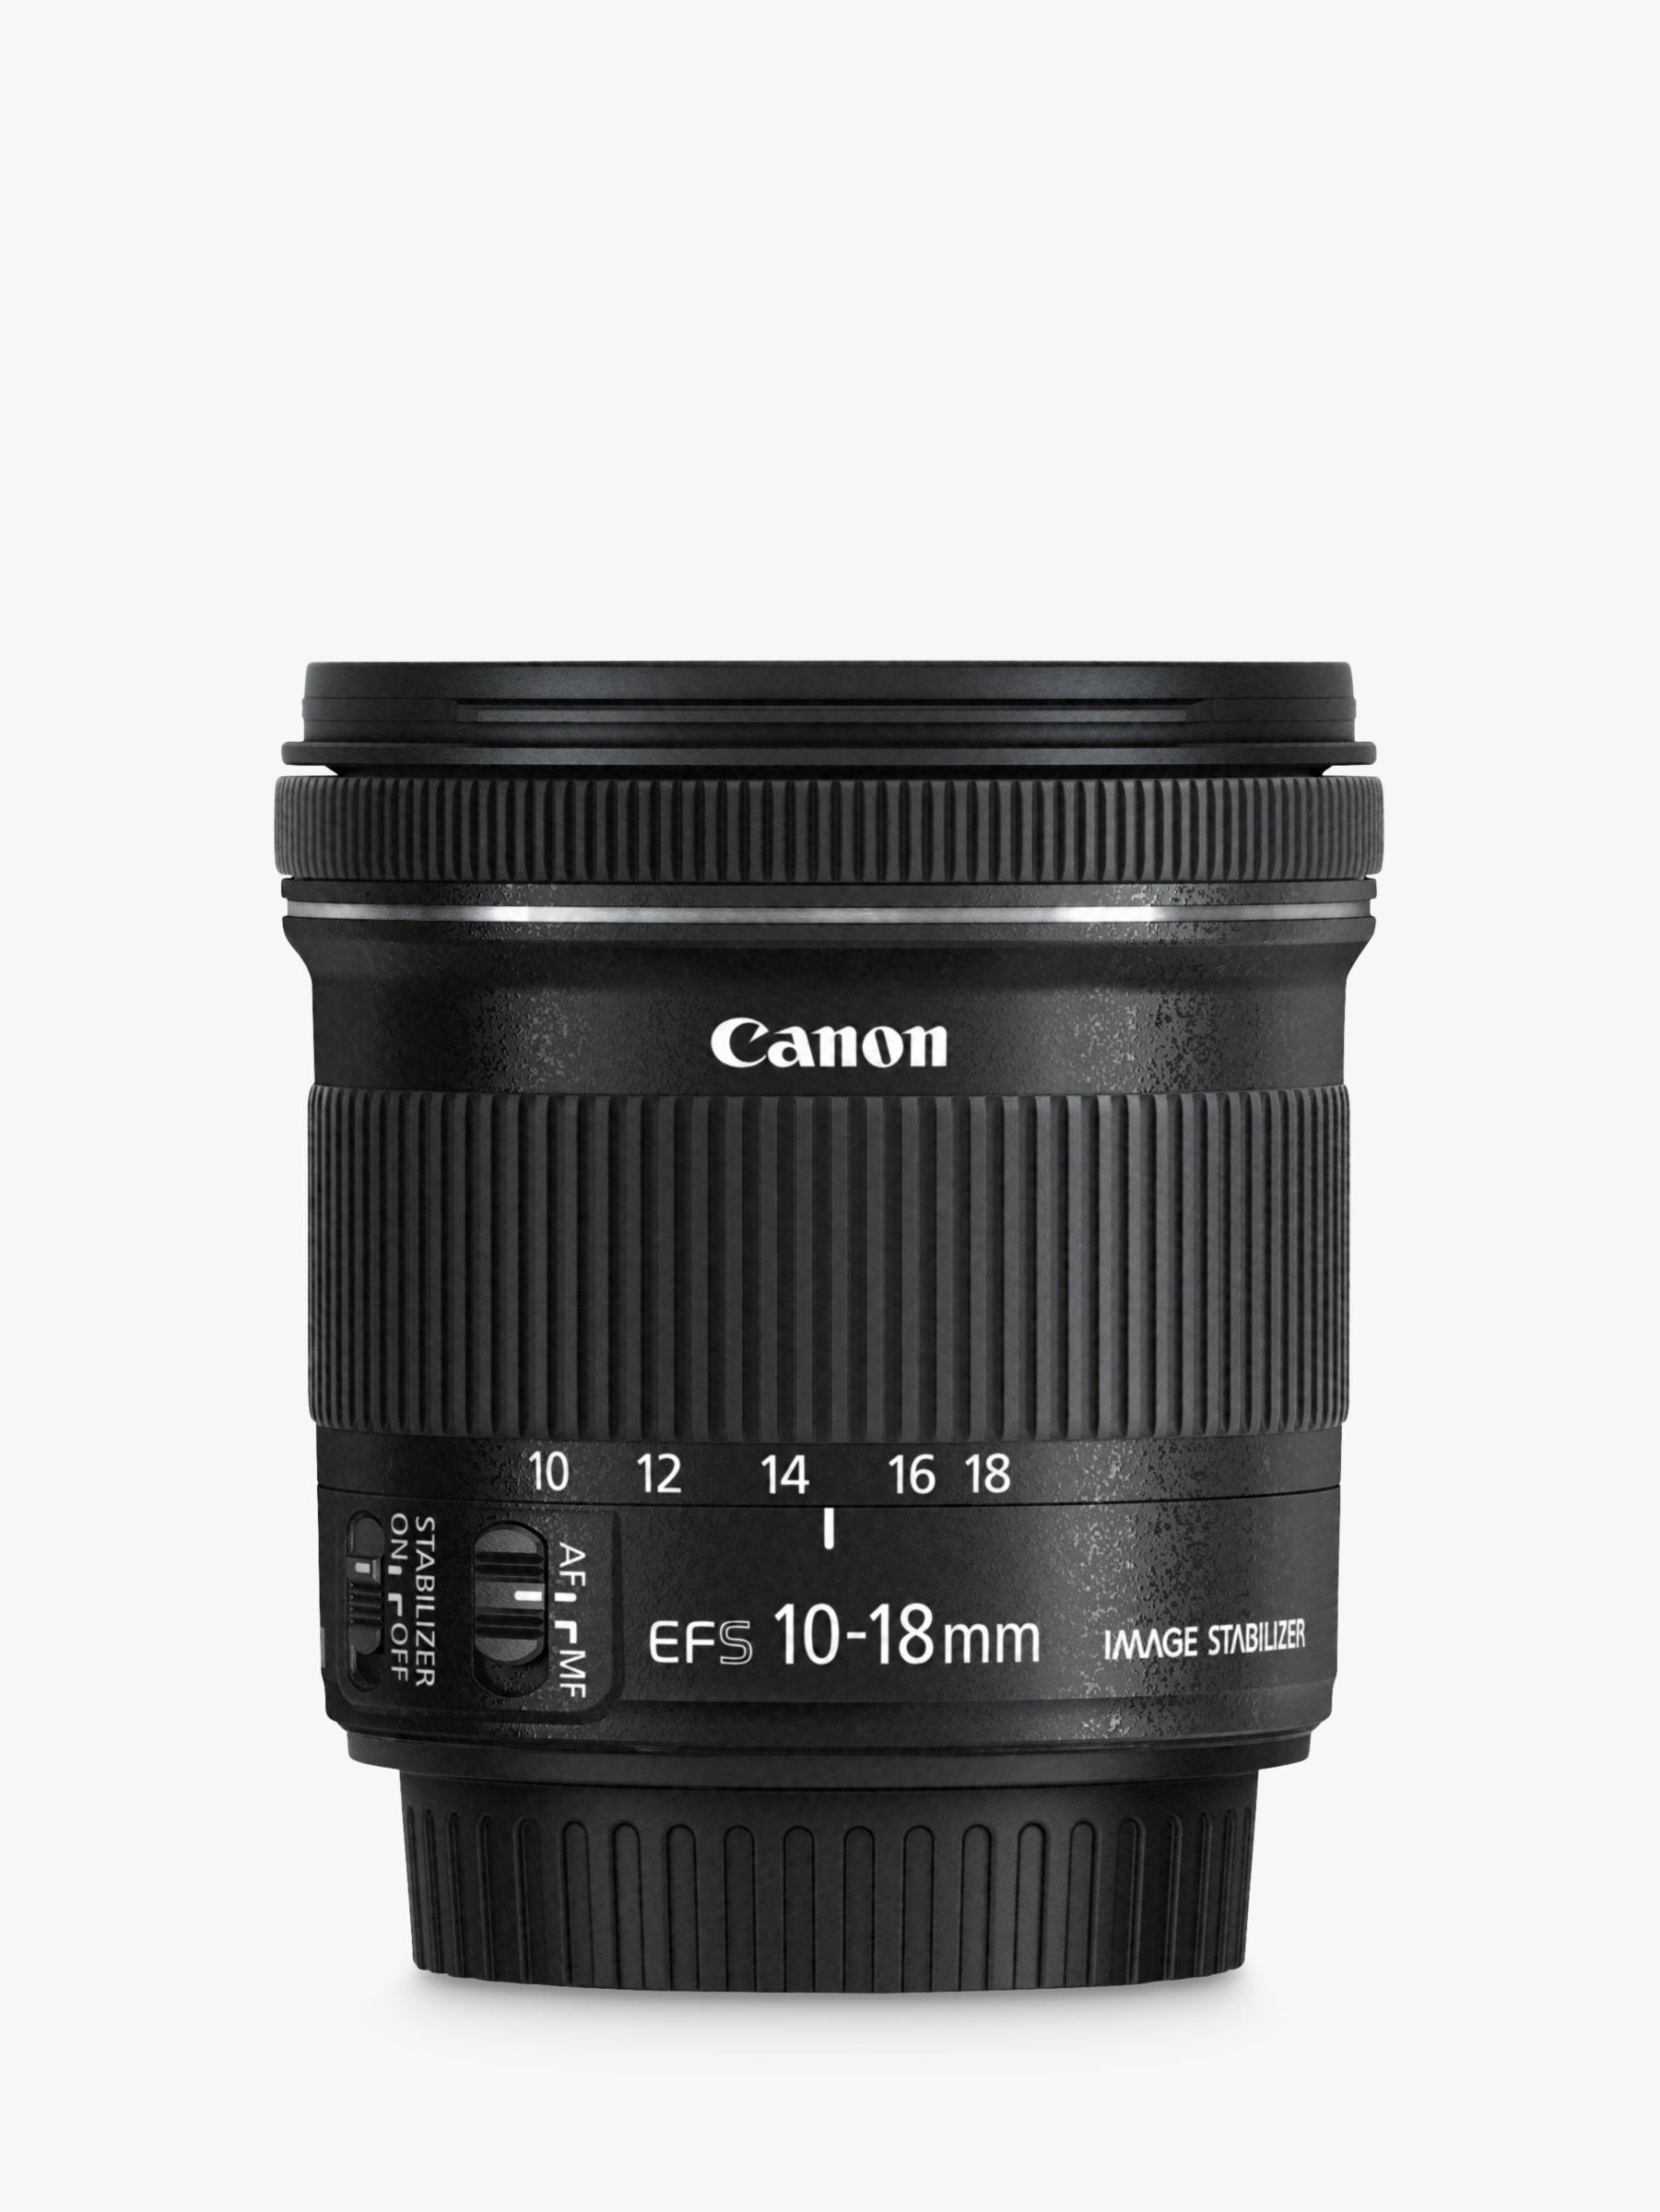 Image of Canon EFS 1018mm f4556 IS STM Wide Angle Lens